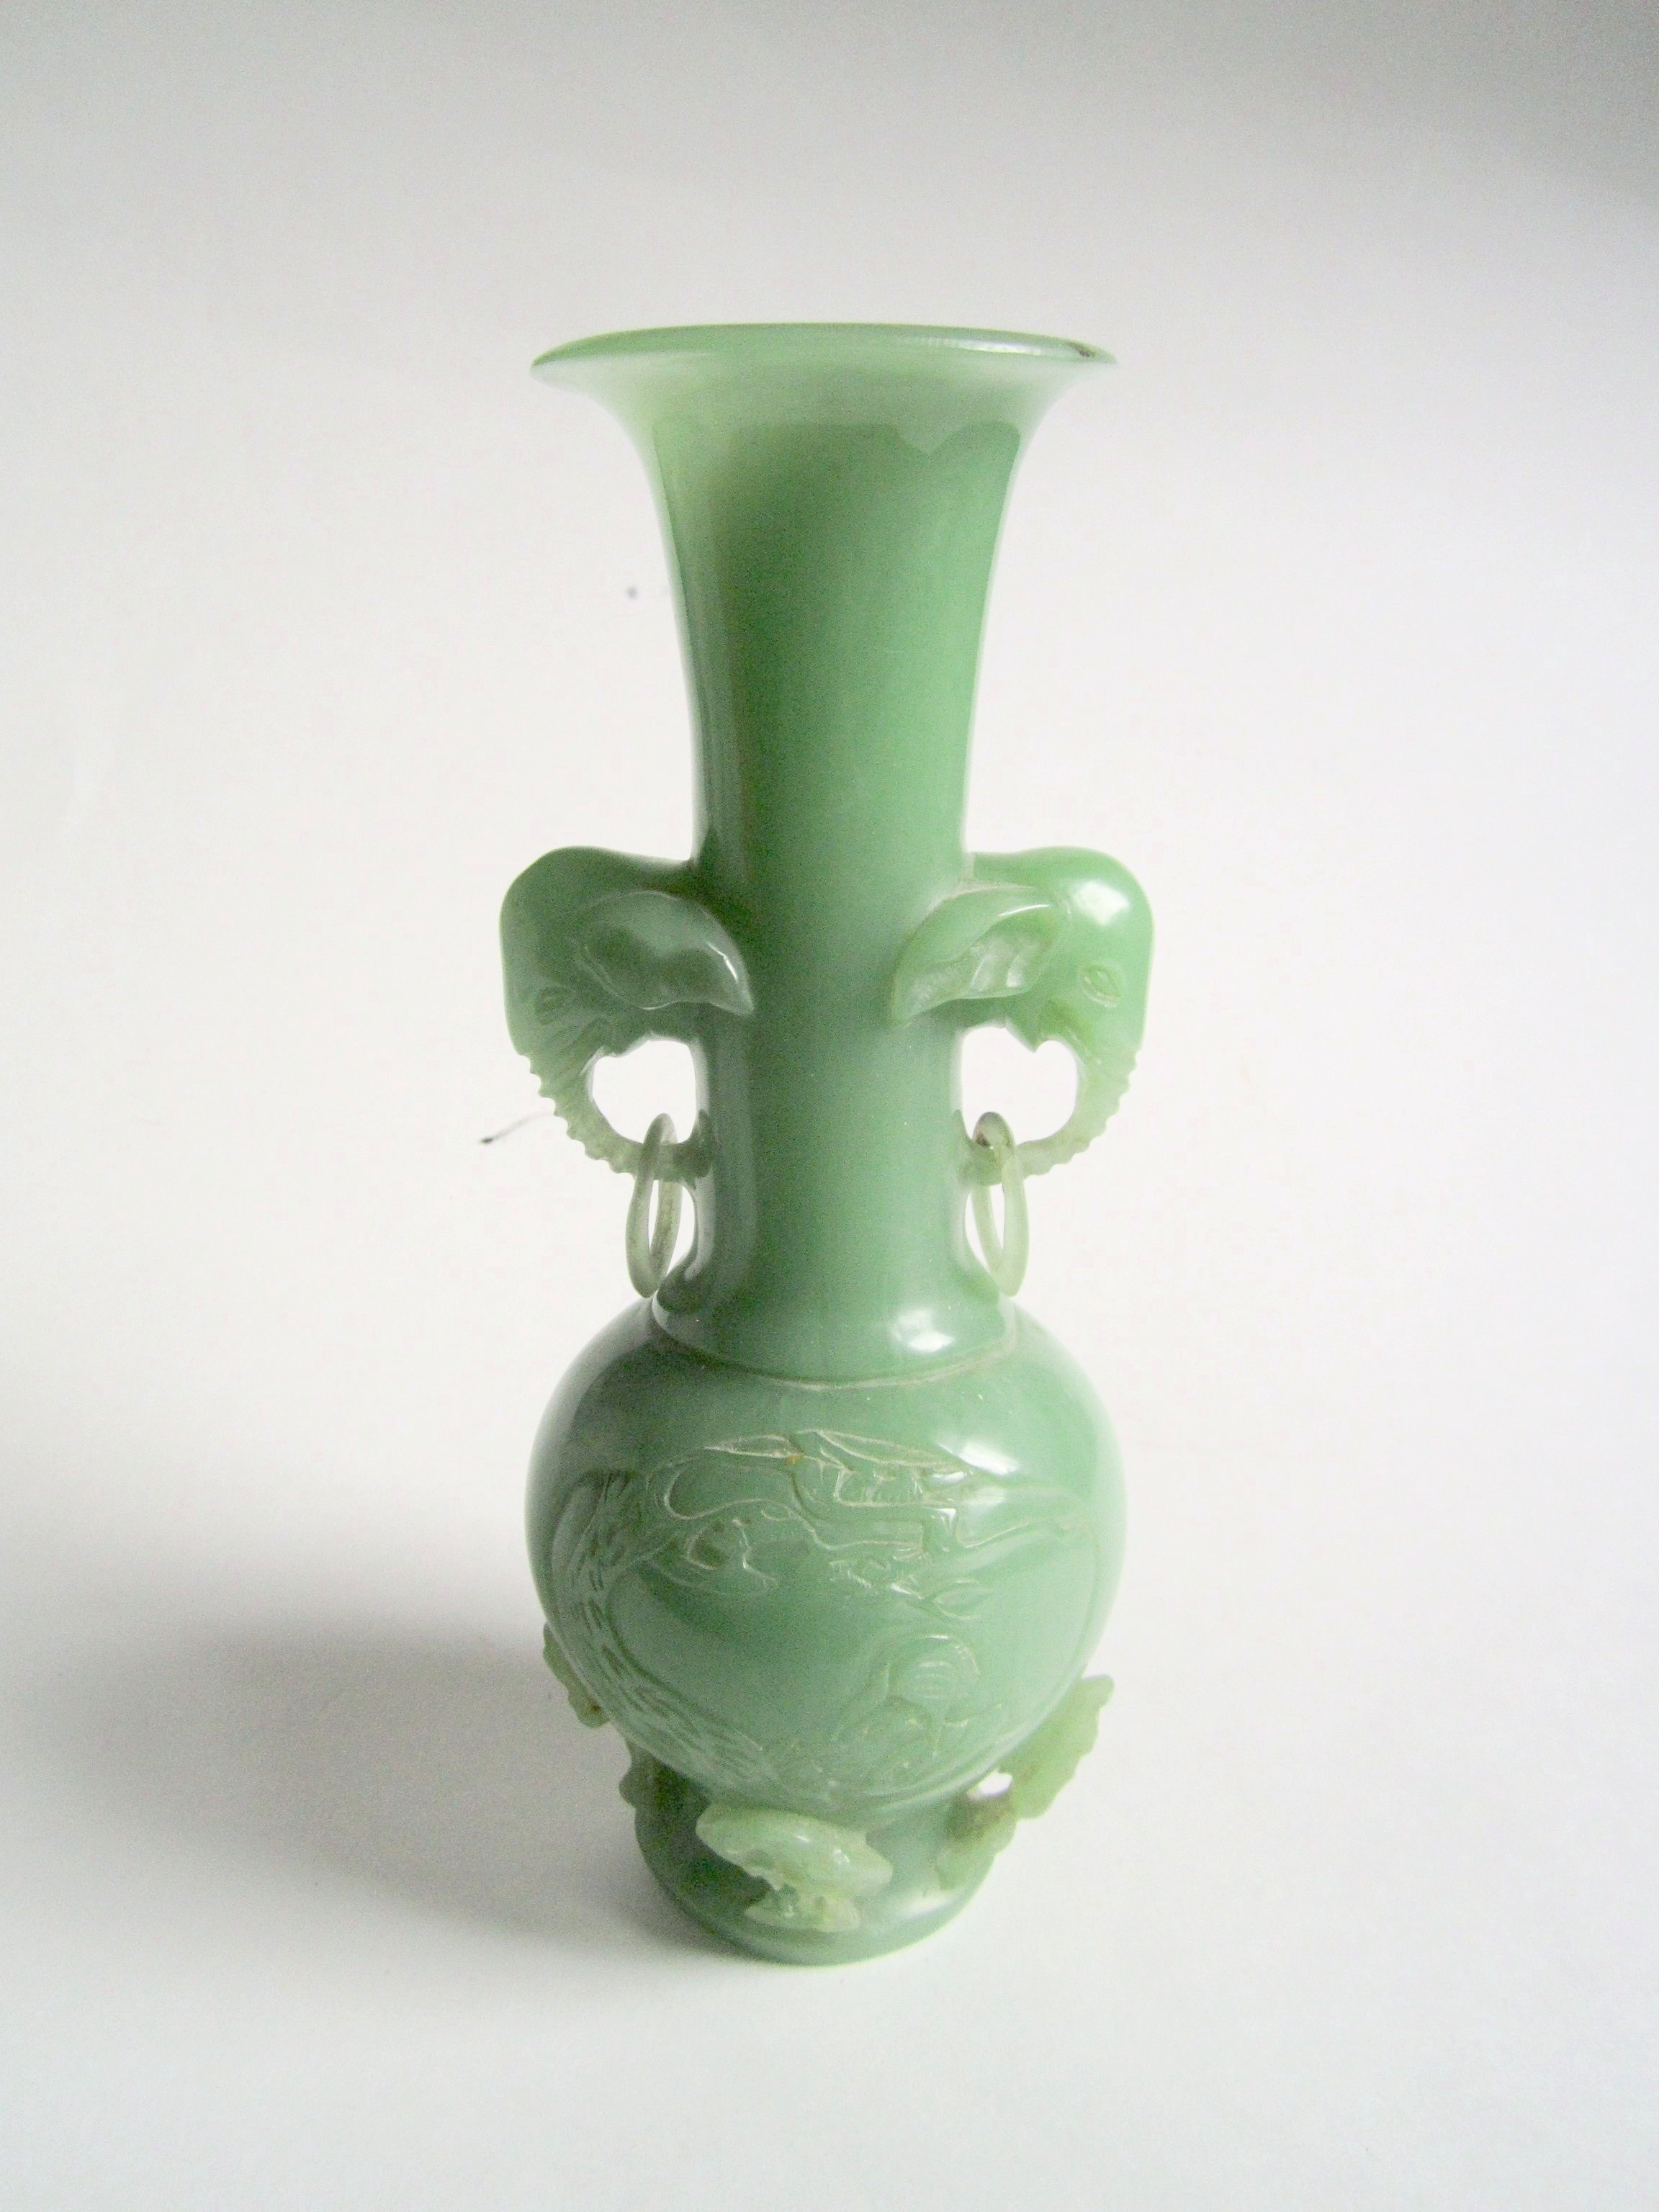 old glass vases worth money of frugality page 8 things i find in the garbage with otherwise i saved what looks to be a jadeite glass vase ndg